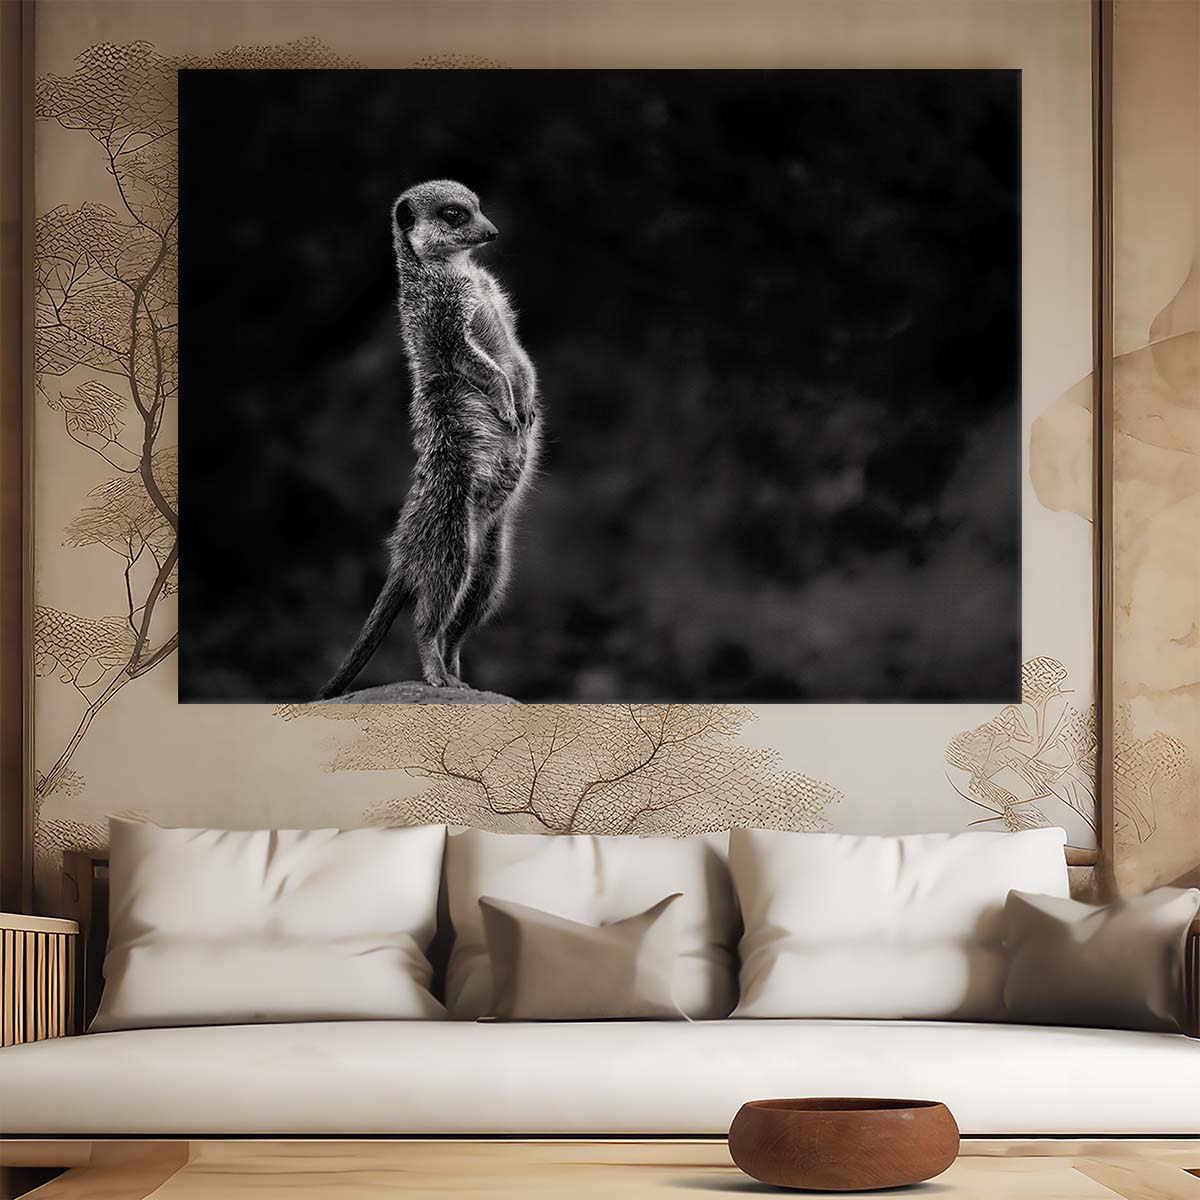 Monochrome Meerkat Safari Observer Wall Art by Luxuriance Designs. Made in USA.